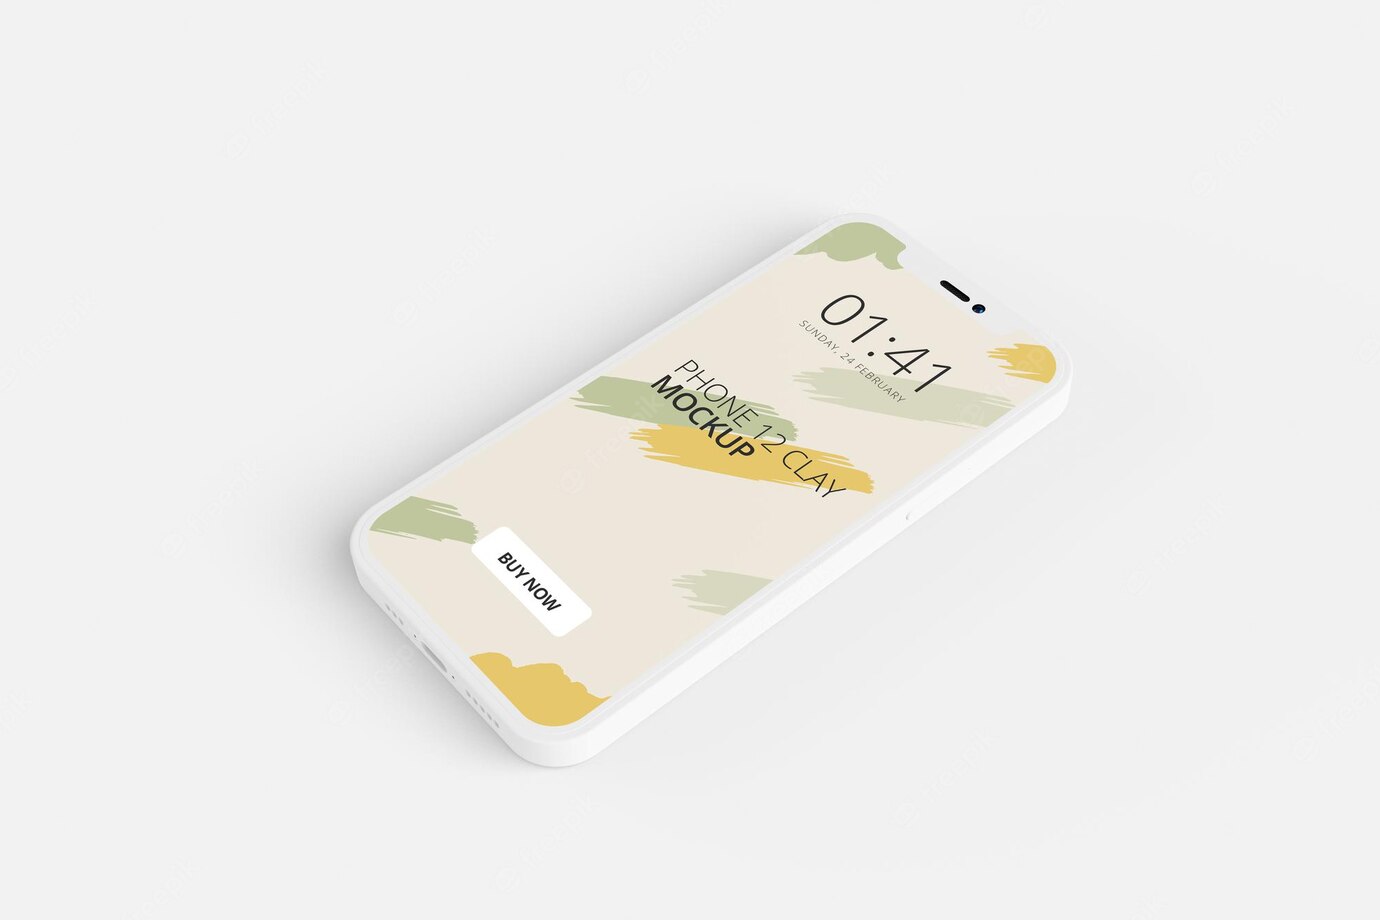 clay phone screen mockup design isolated 322208 108